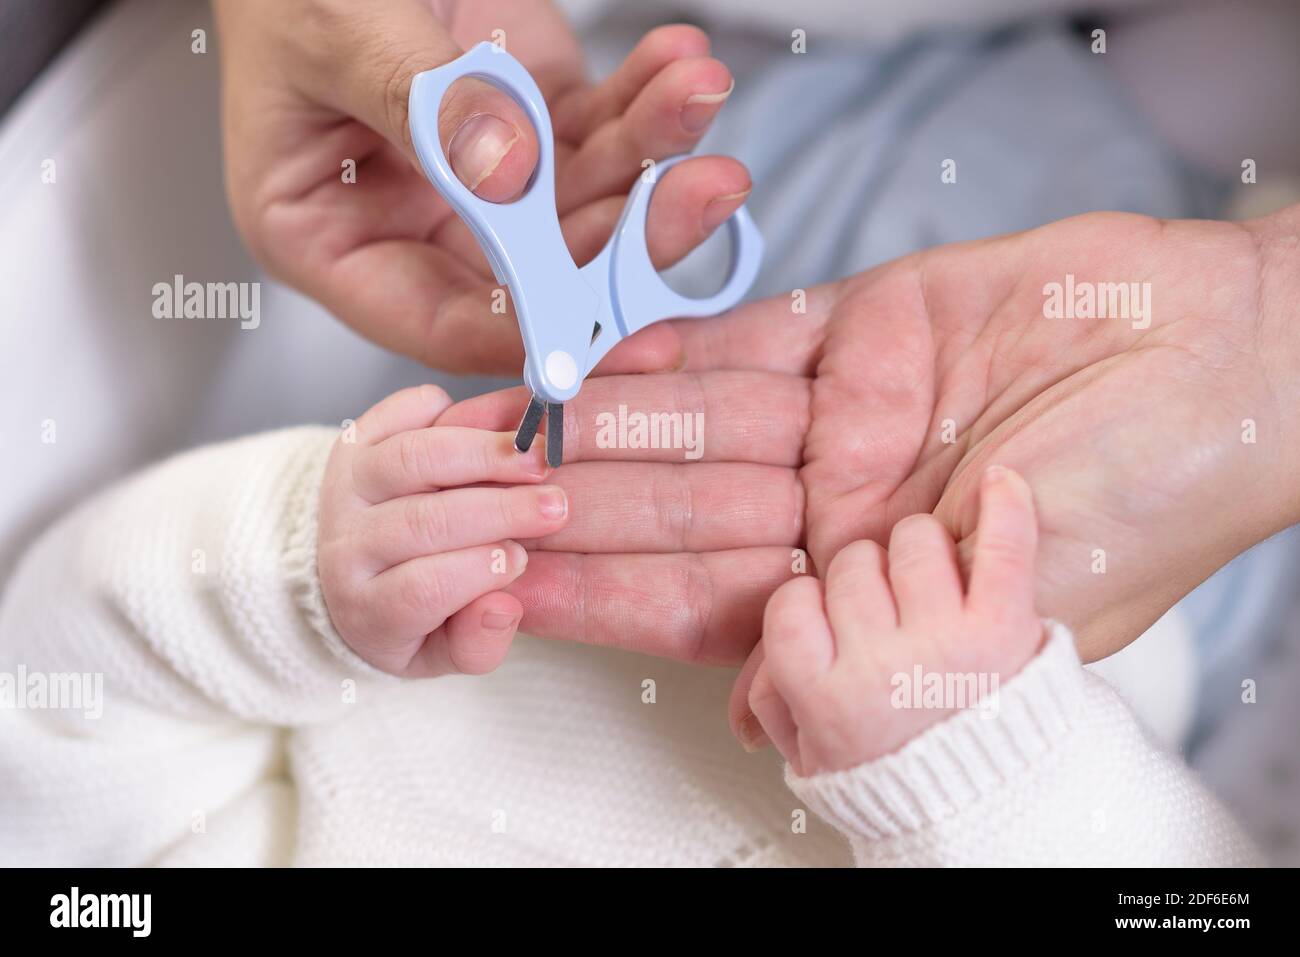 Baby Talk: How to cut your newborn's nails | Arab News